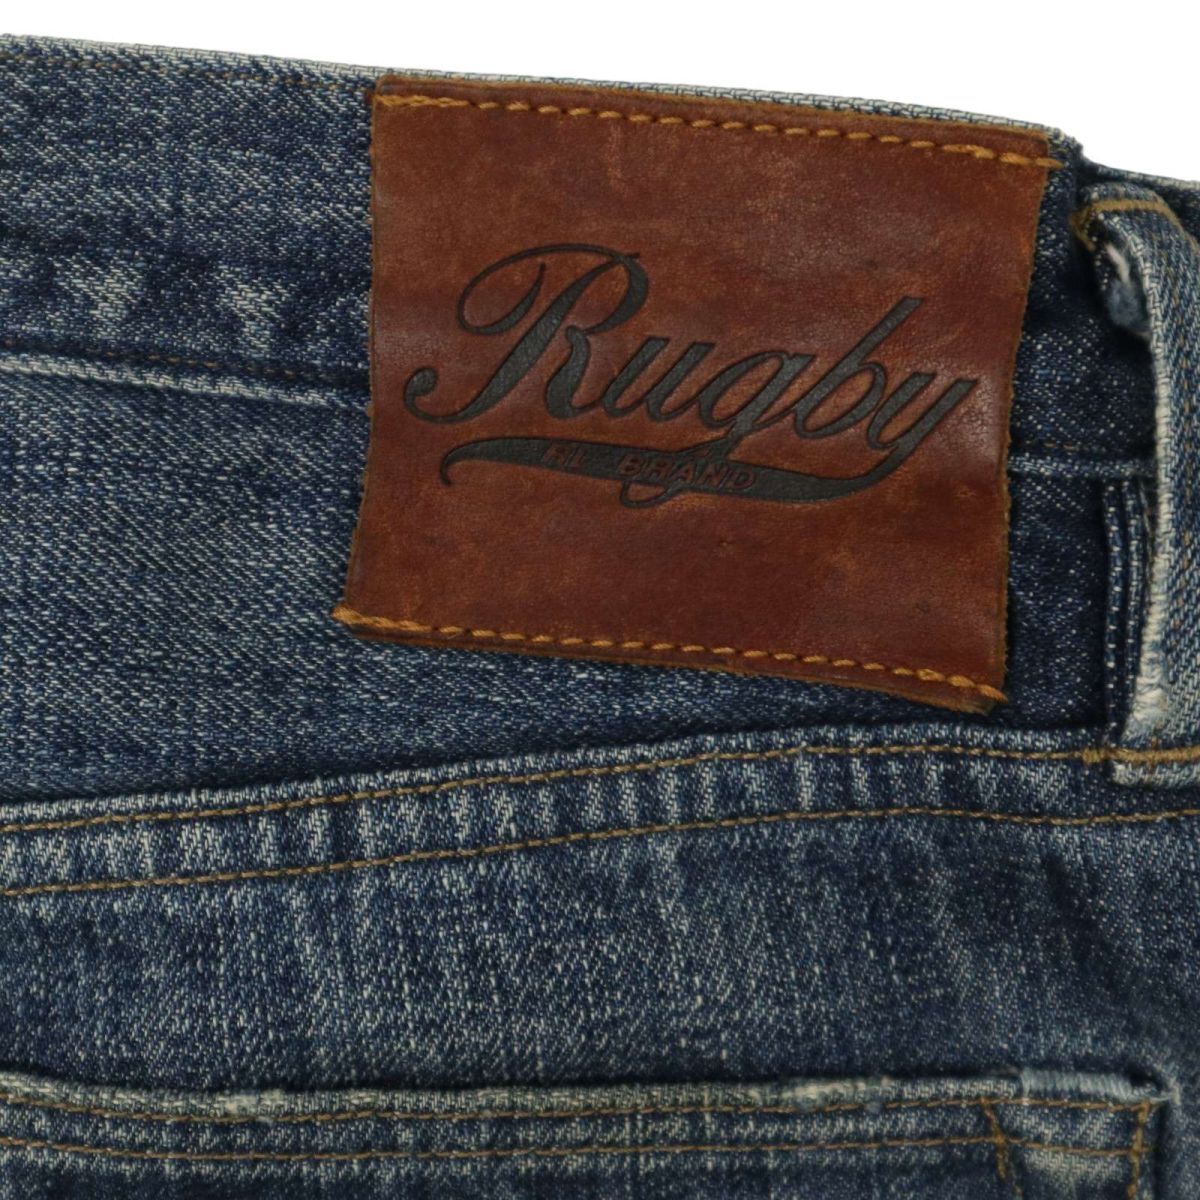 RUGBY rugby Ralph Lauren through year USED processing * slim tapered Denim pants jeans Sz.30×32 men's C4B01941_4#R